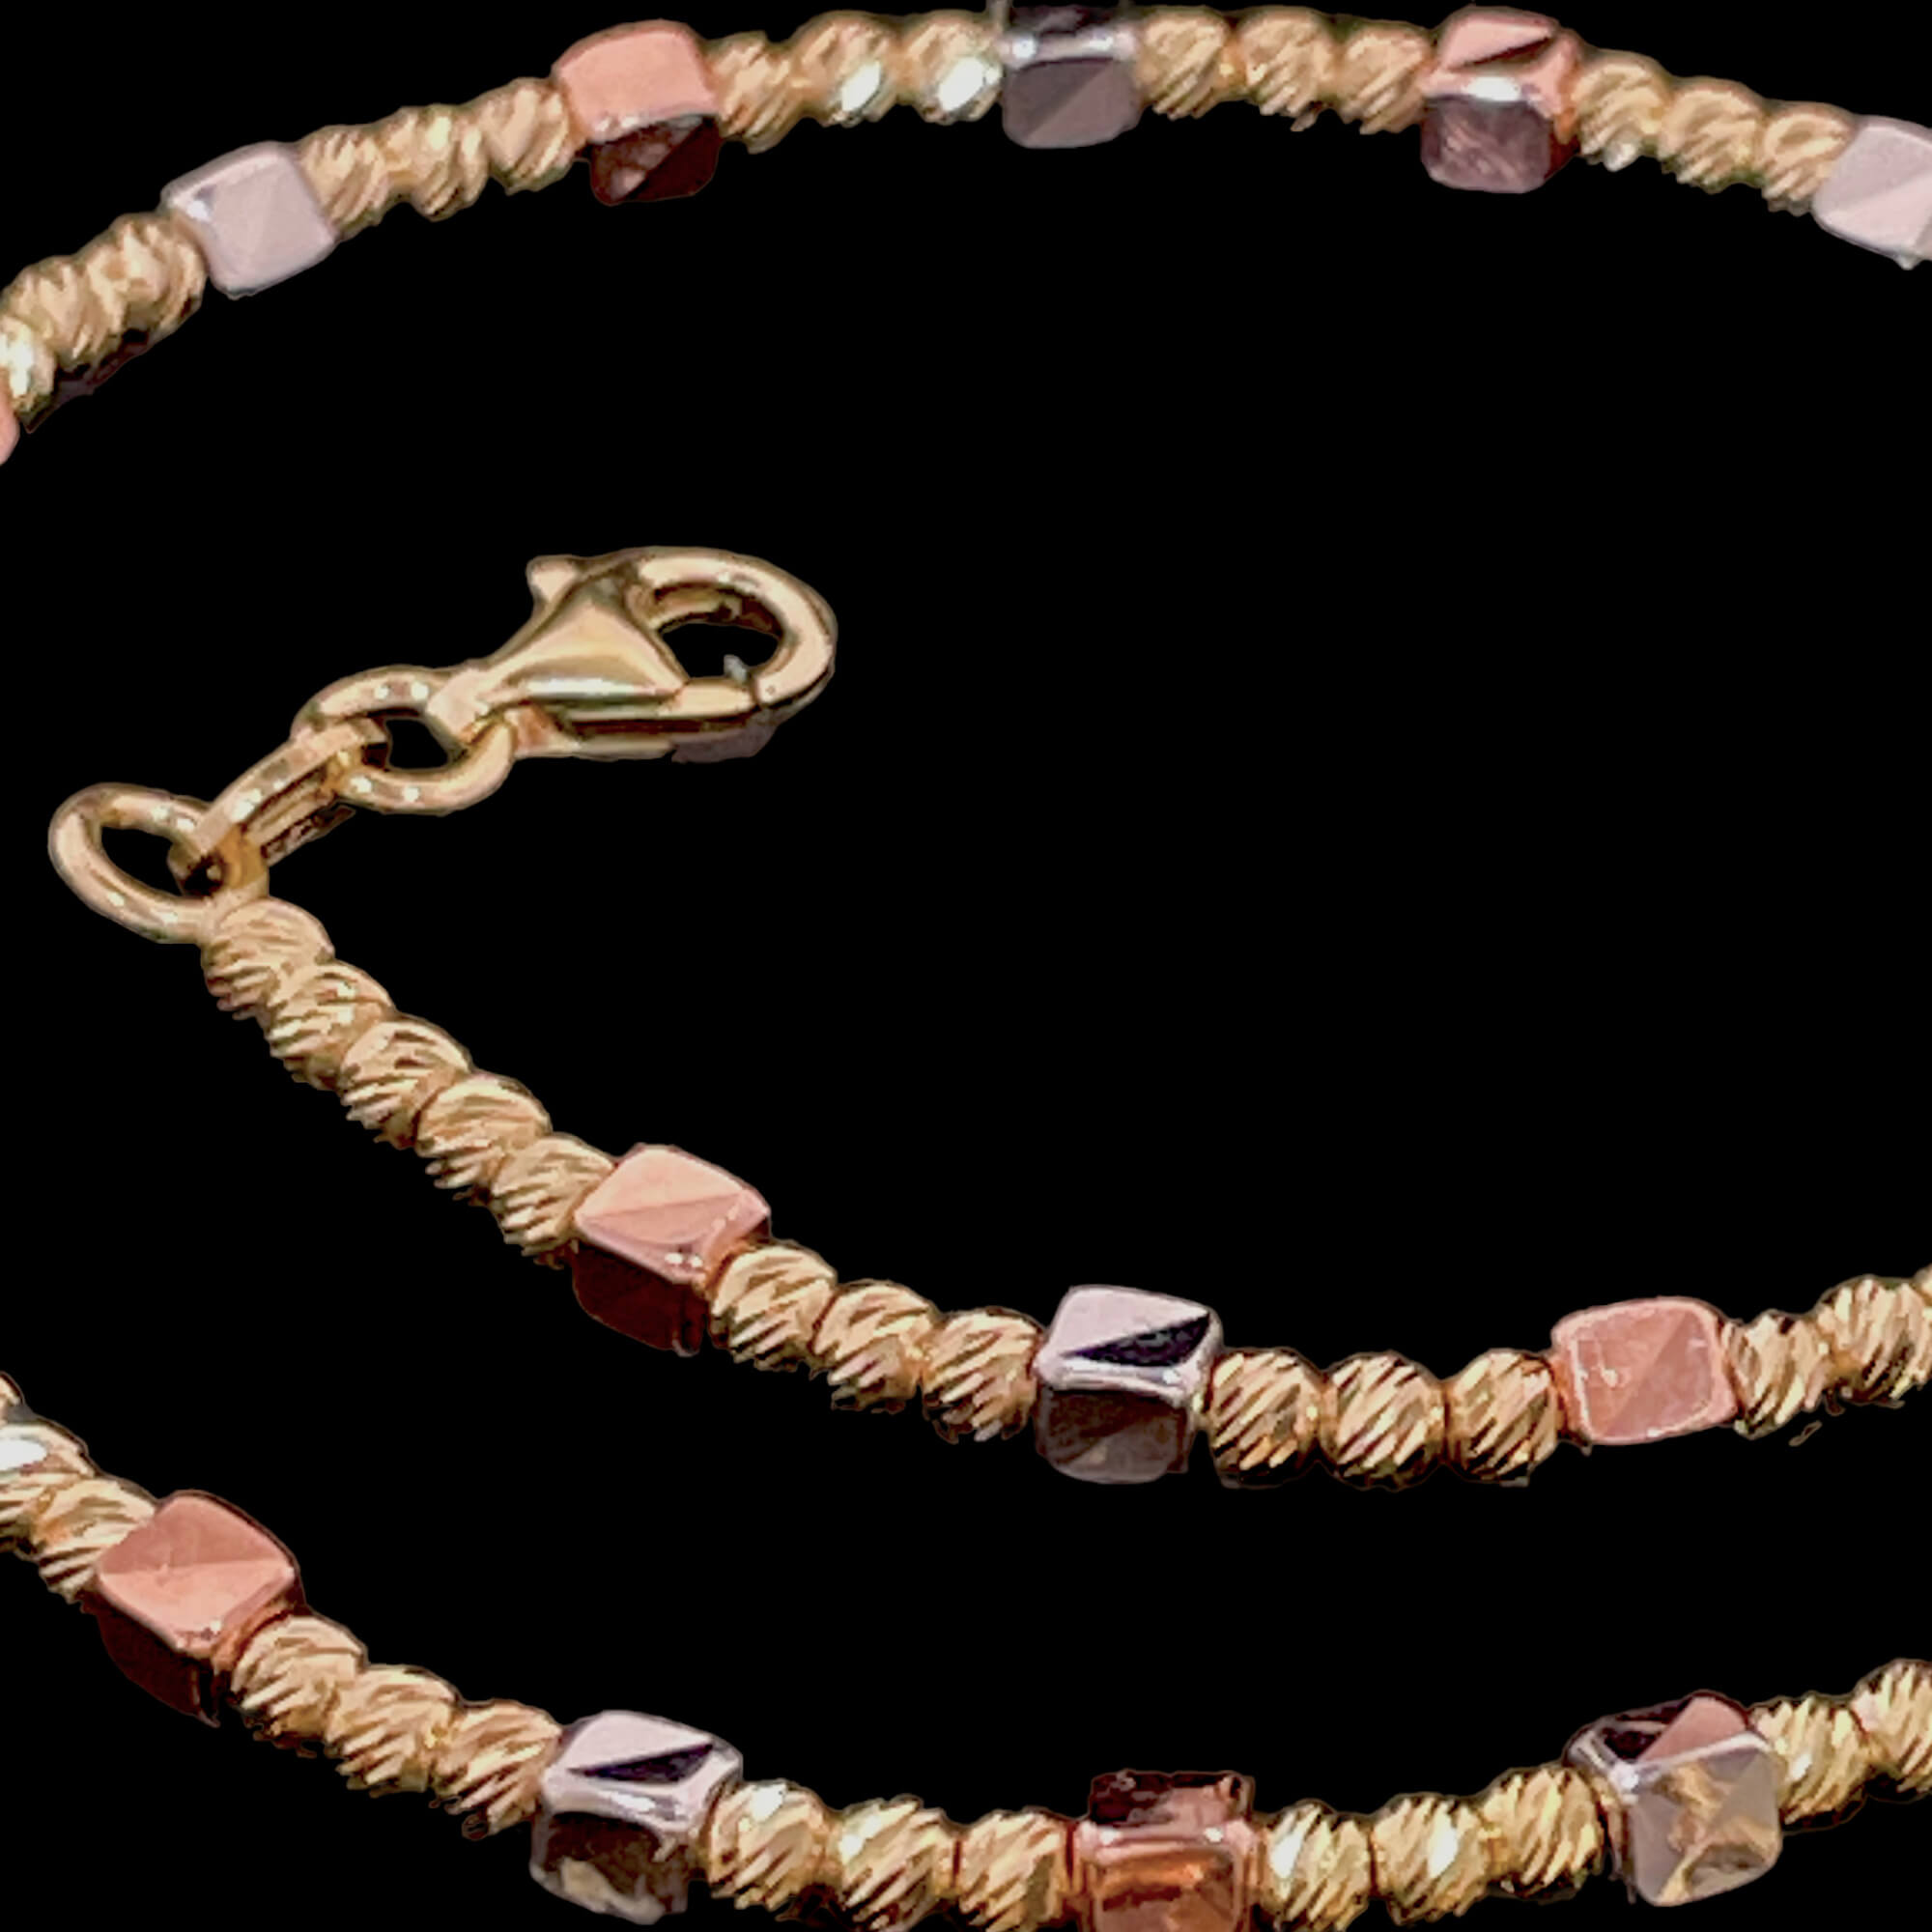 Three-colored chain, 3mm beads with processing